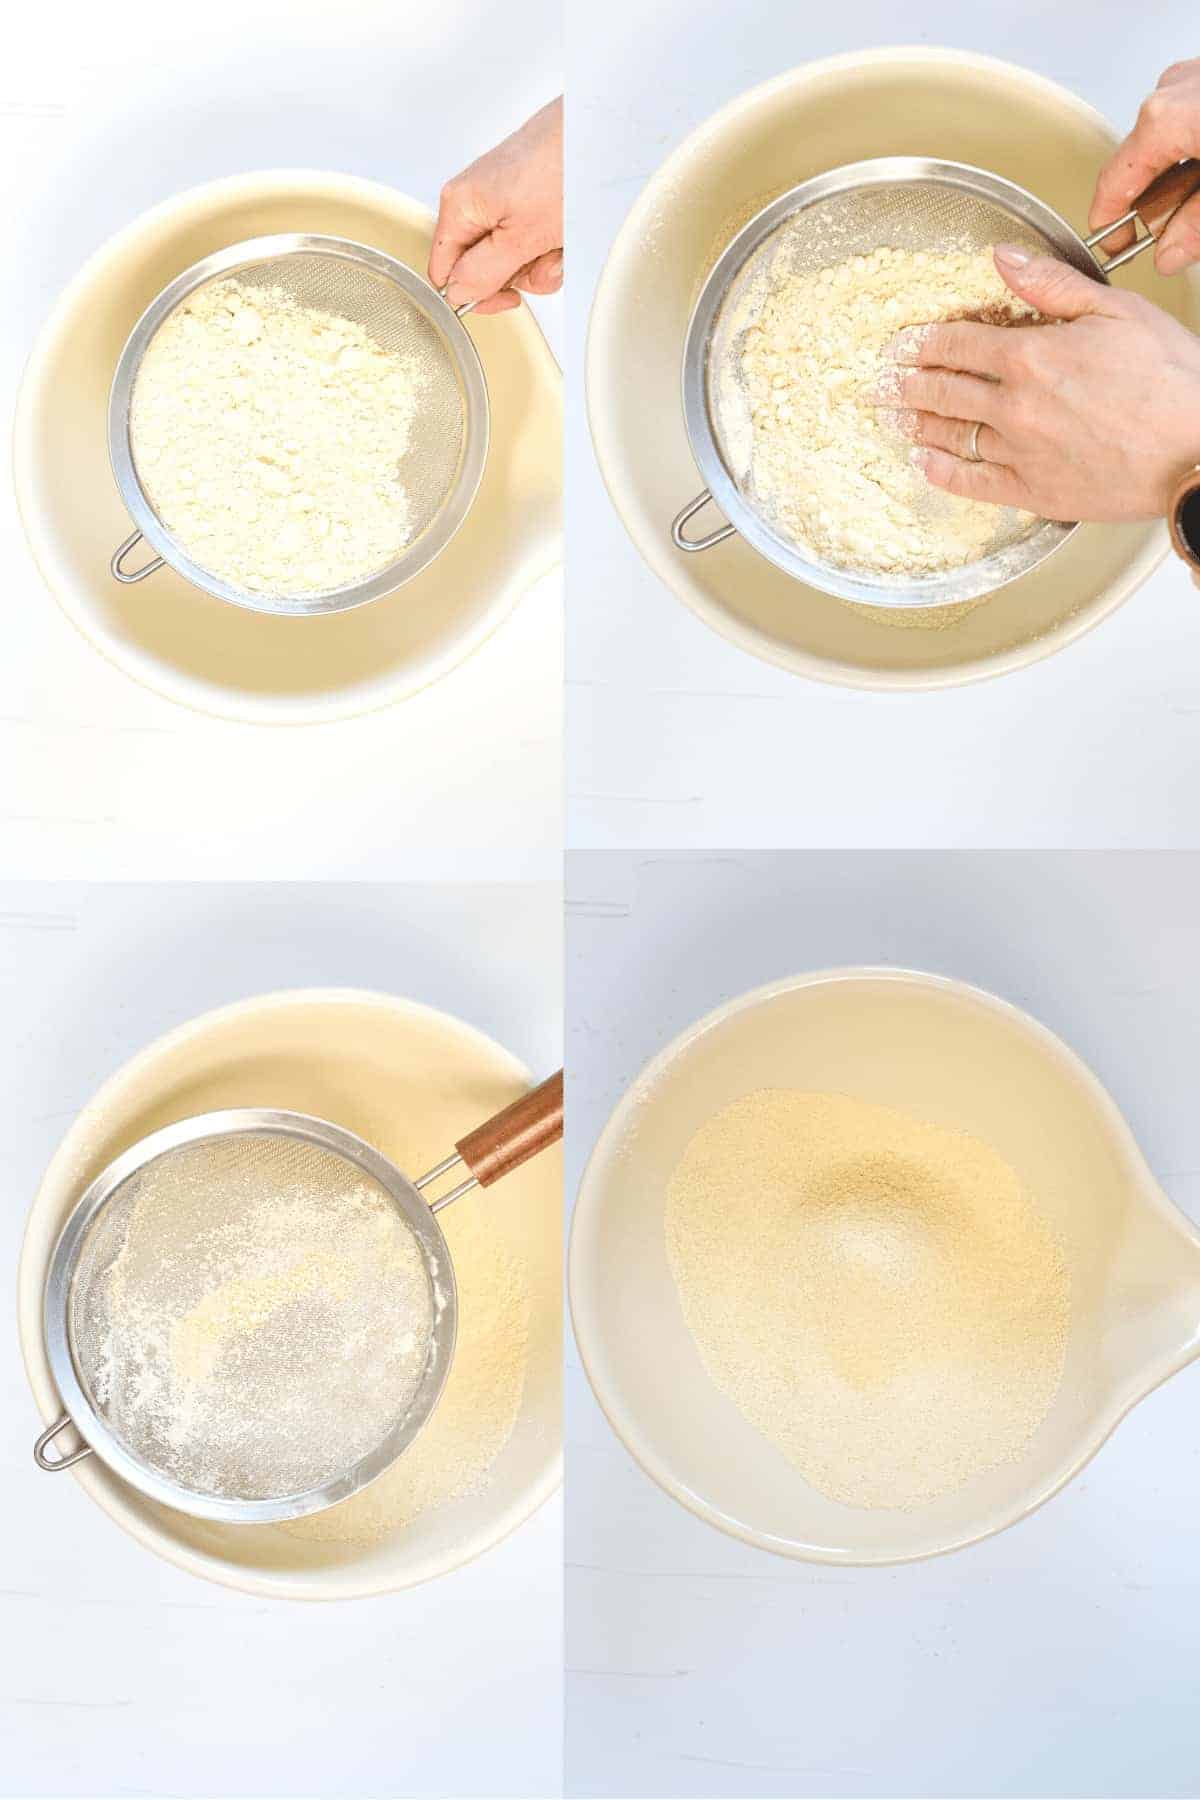 How to sift chickpea flour